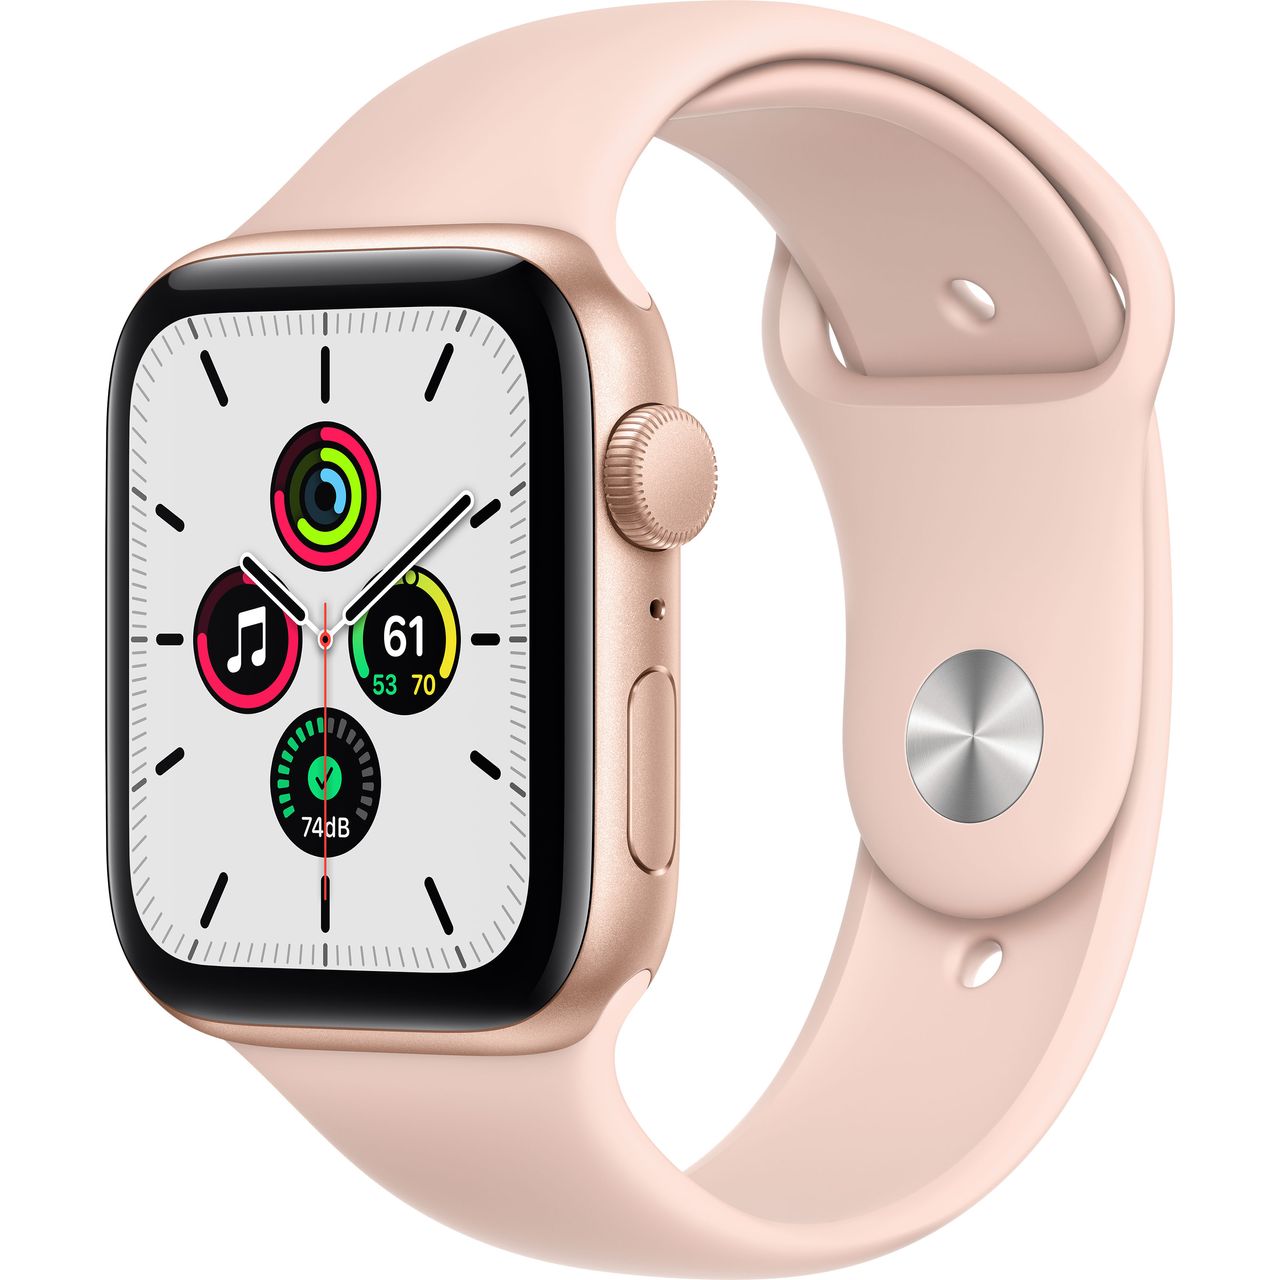 Apple Watch SE, 44mm, GPS [2020] Review